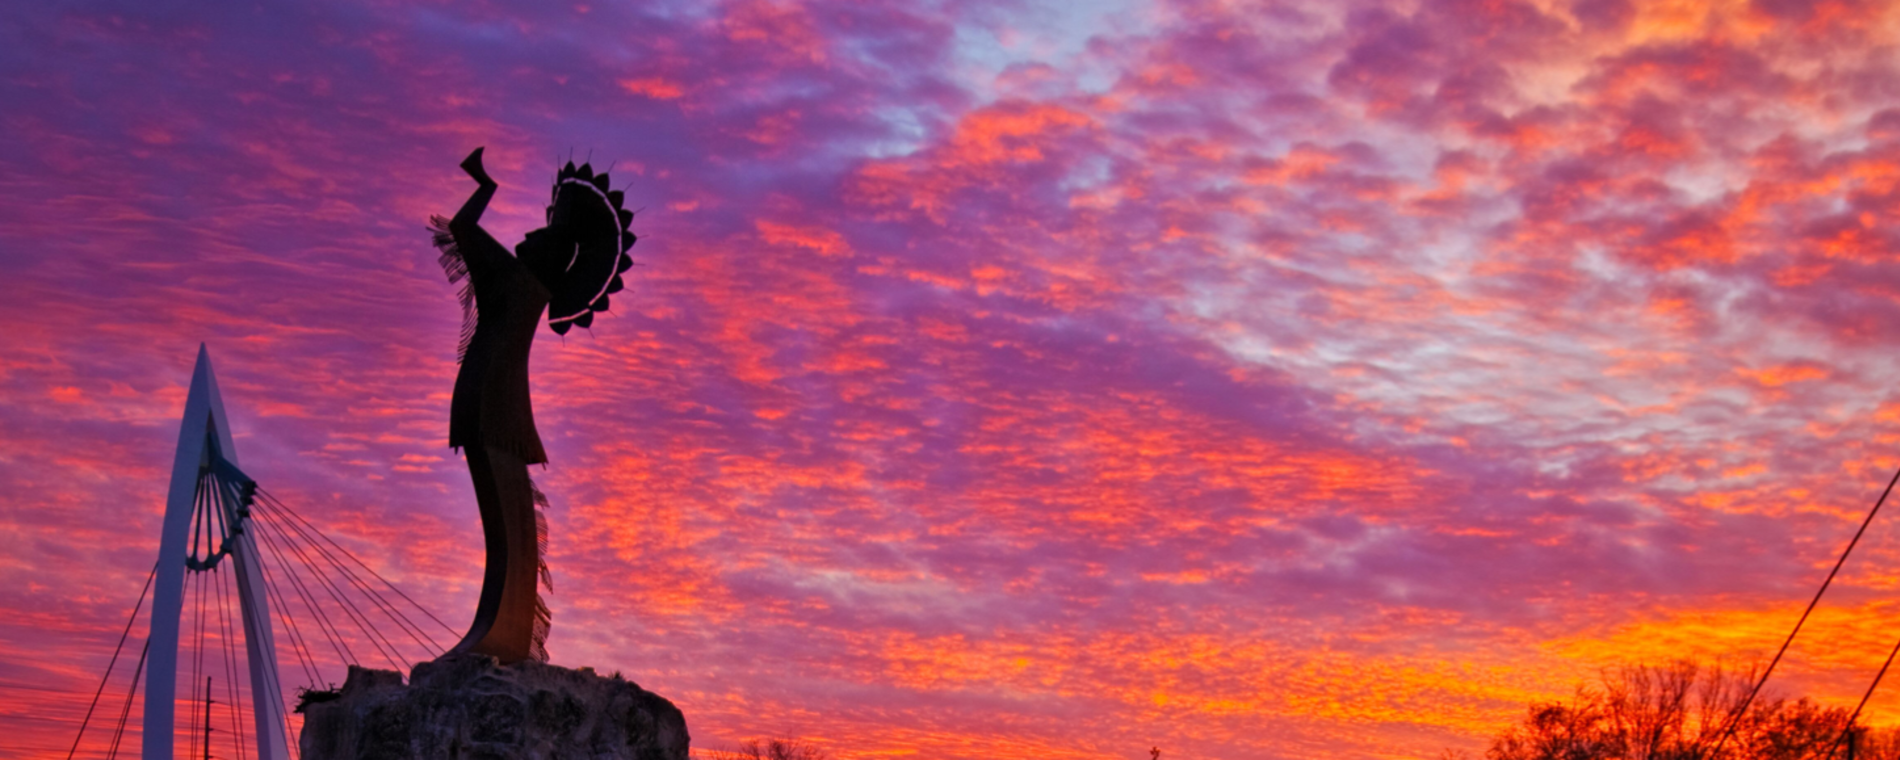 The Keeper of the Plains stands under a beautiful purple and orange sunset in Wichita